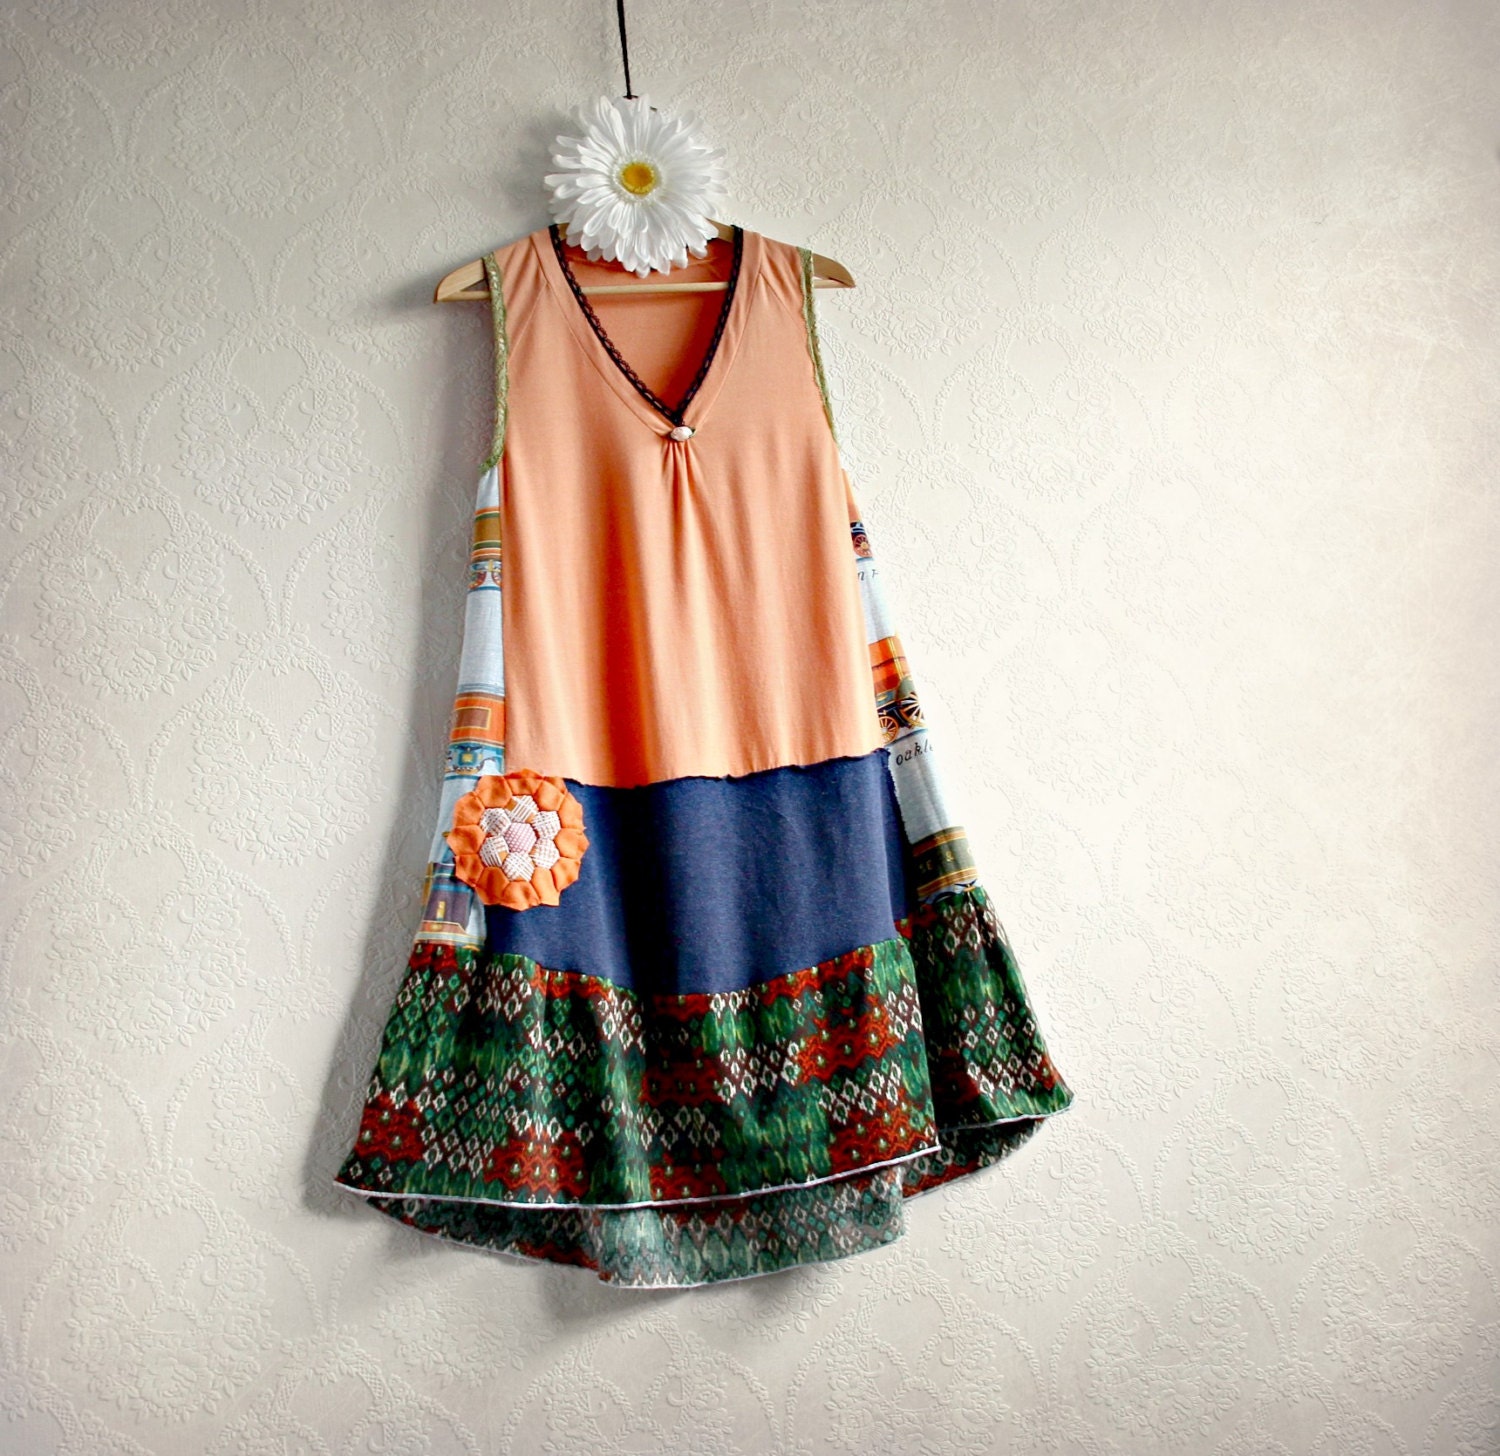 Upcycled Clothing Peach A-Line Dress Navy Blue Bohemian